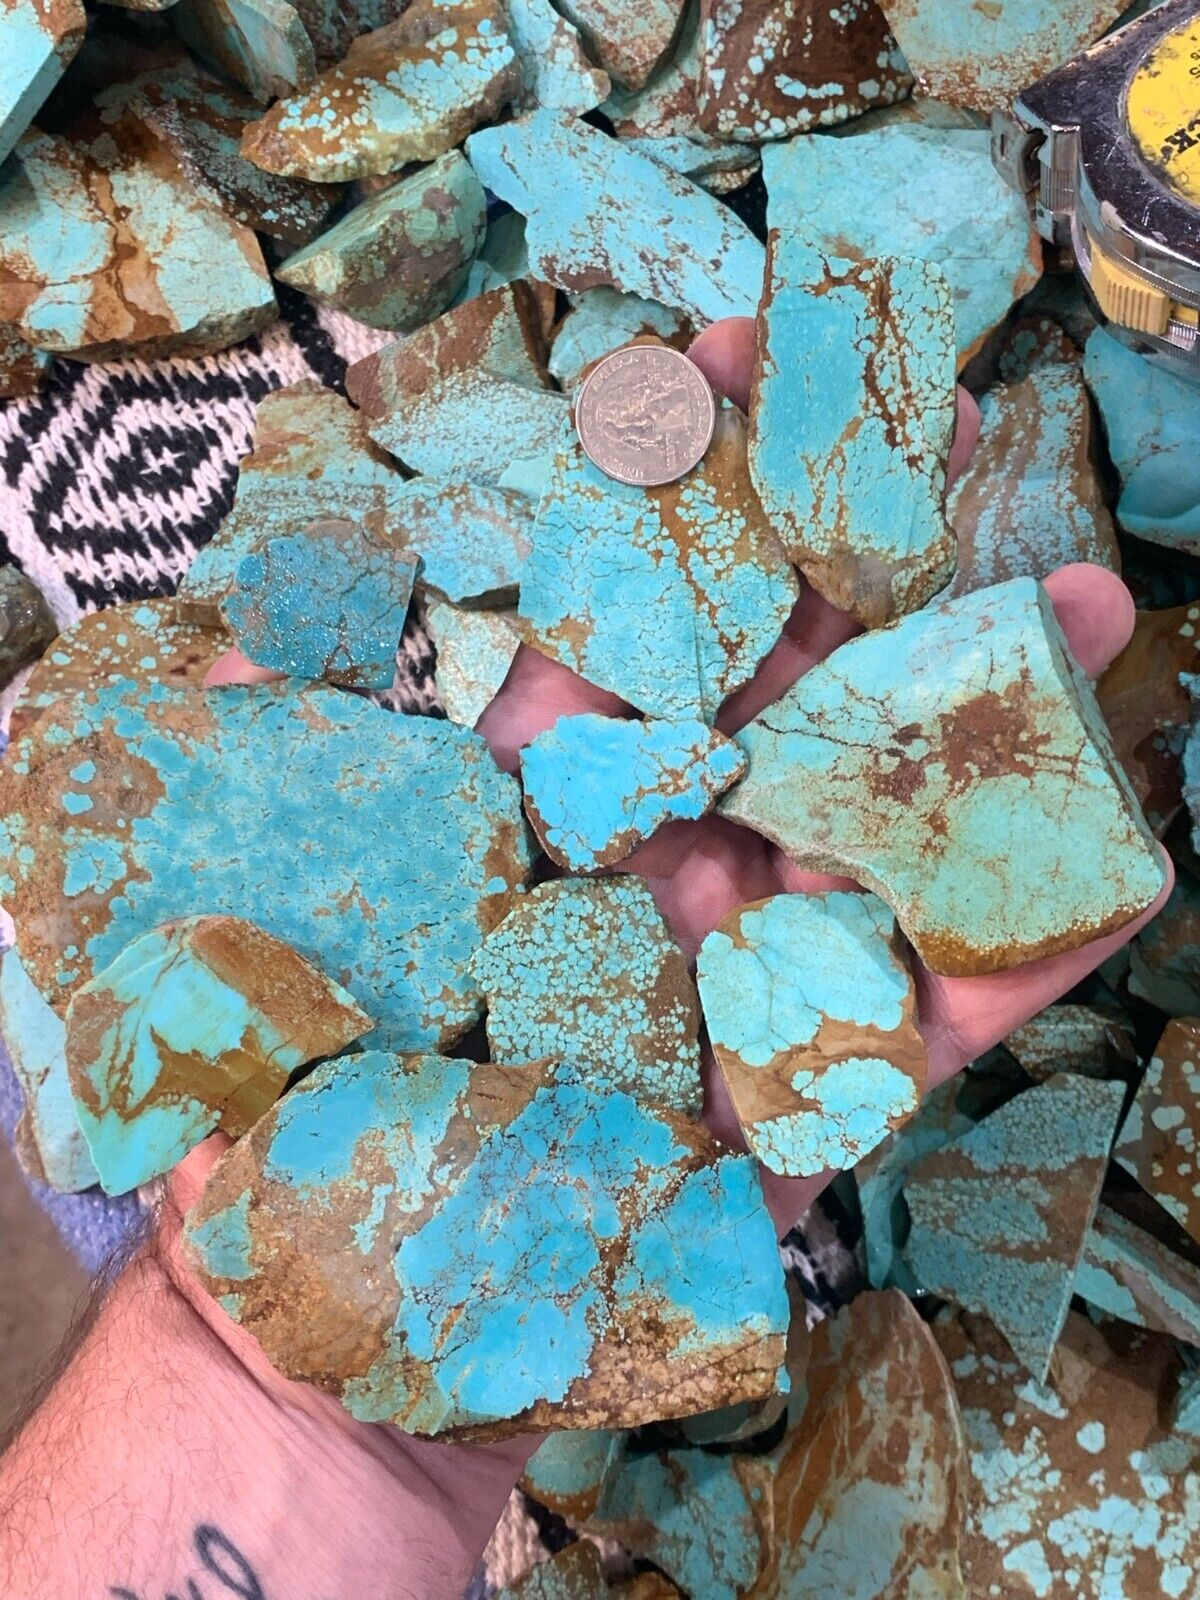 PREMIUM NV#8. Double Stabilized. Fat Turquoise Slabs No crumble Best 10 LBS